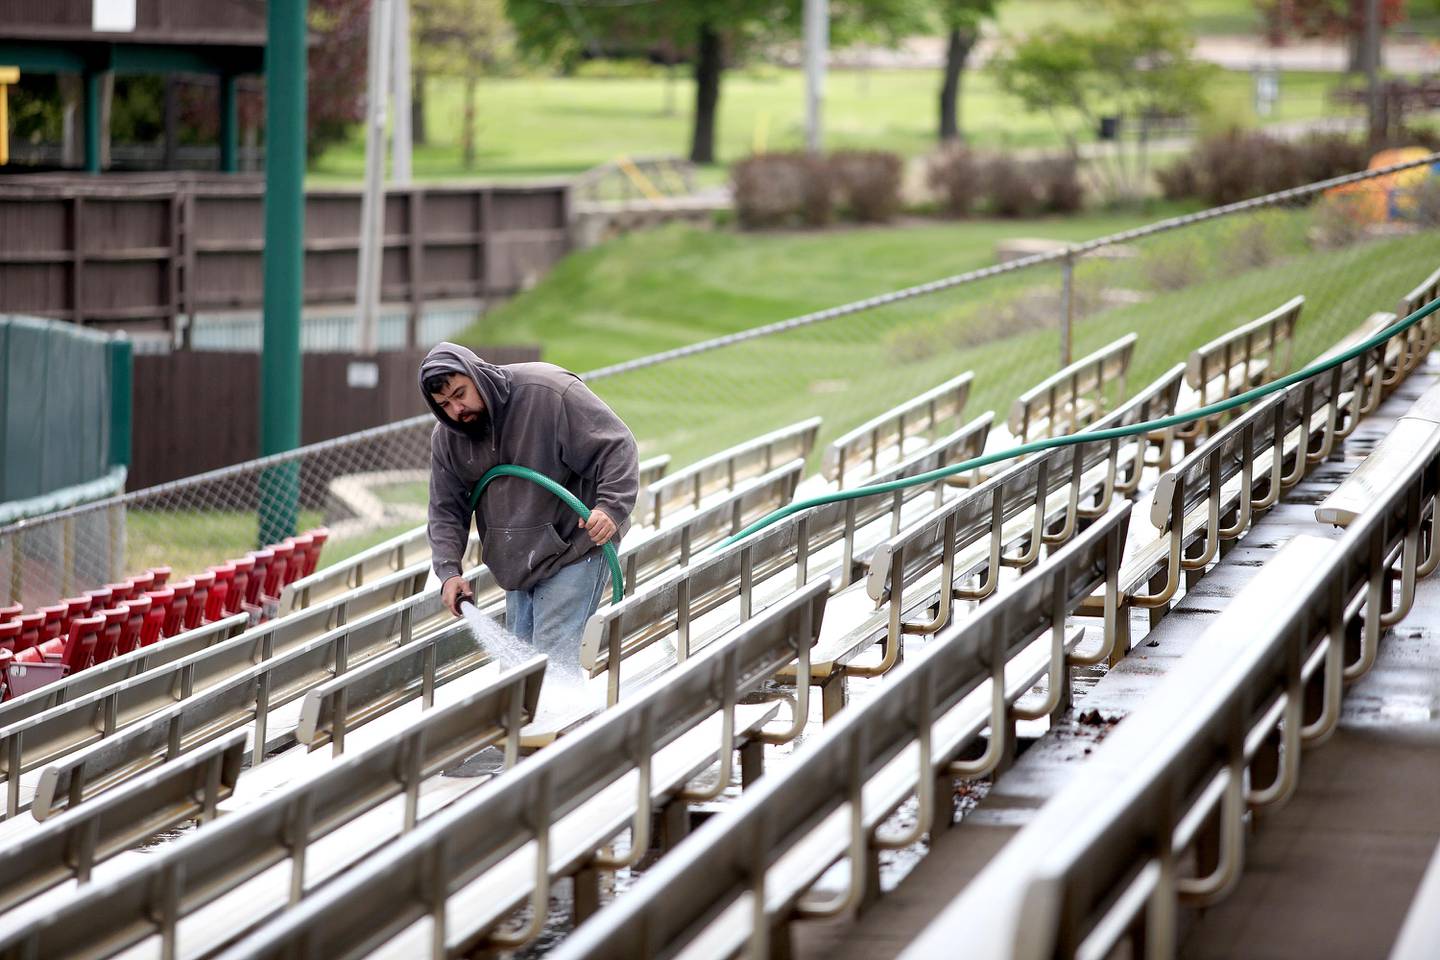 Francisco Amezcua hoses down the seating area at Northwestern Medicine Field in Geneva in preparation for the 2021 Kane County Cougars baseball season.